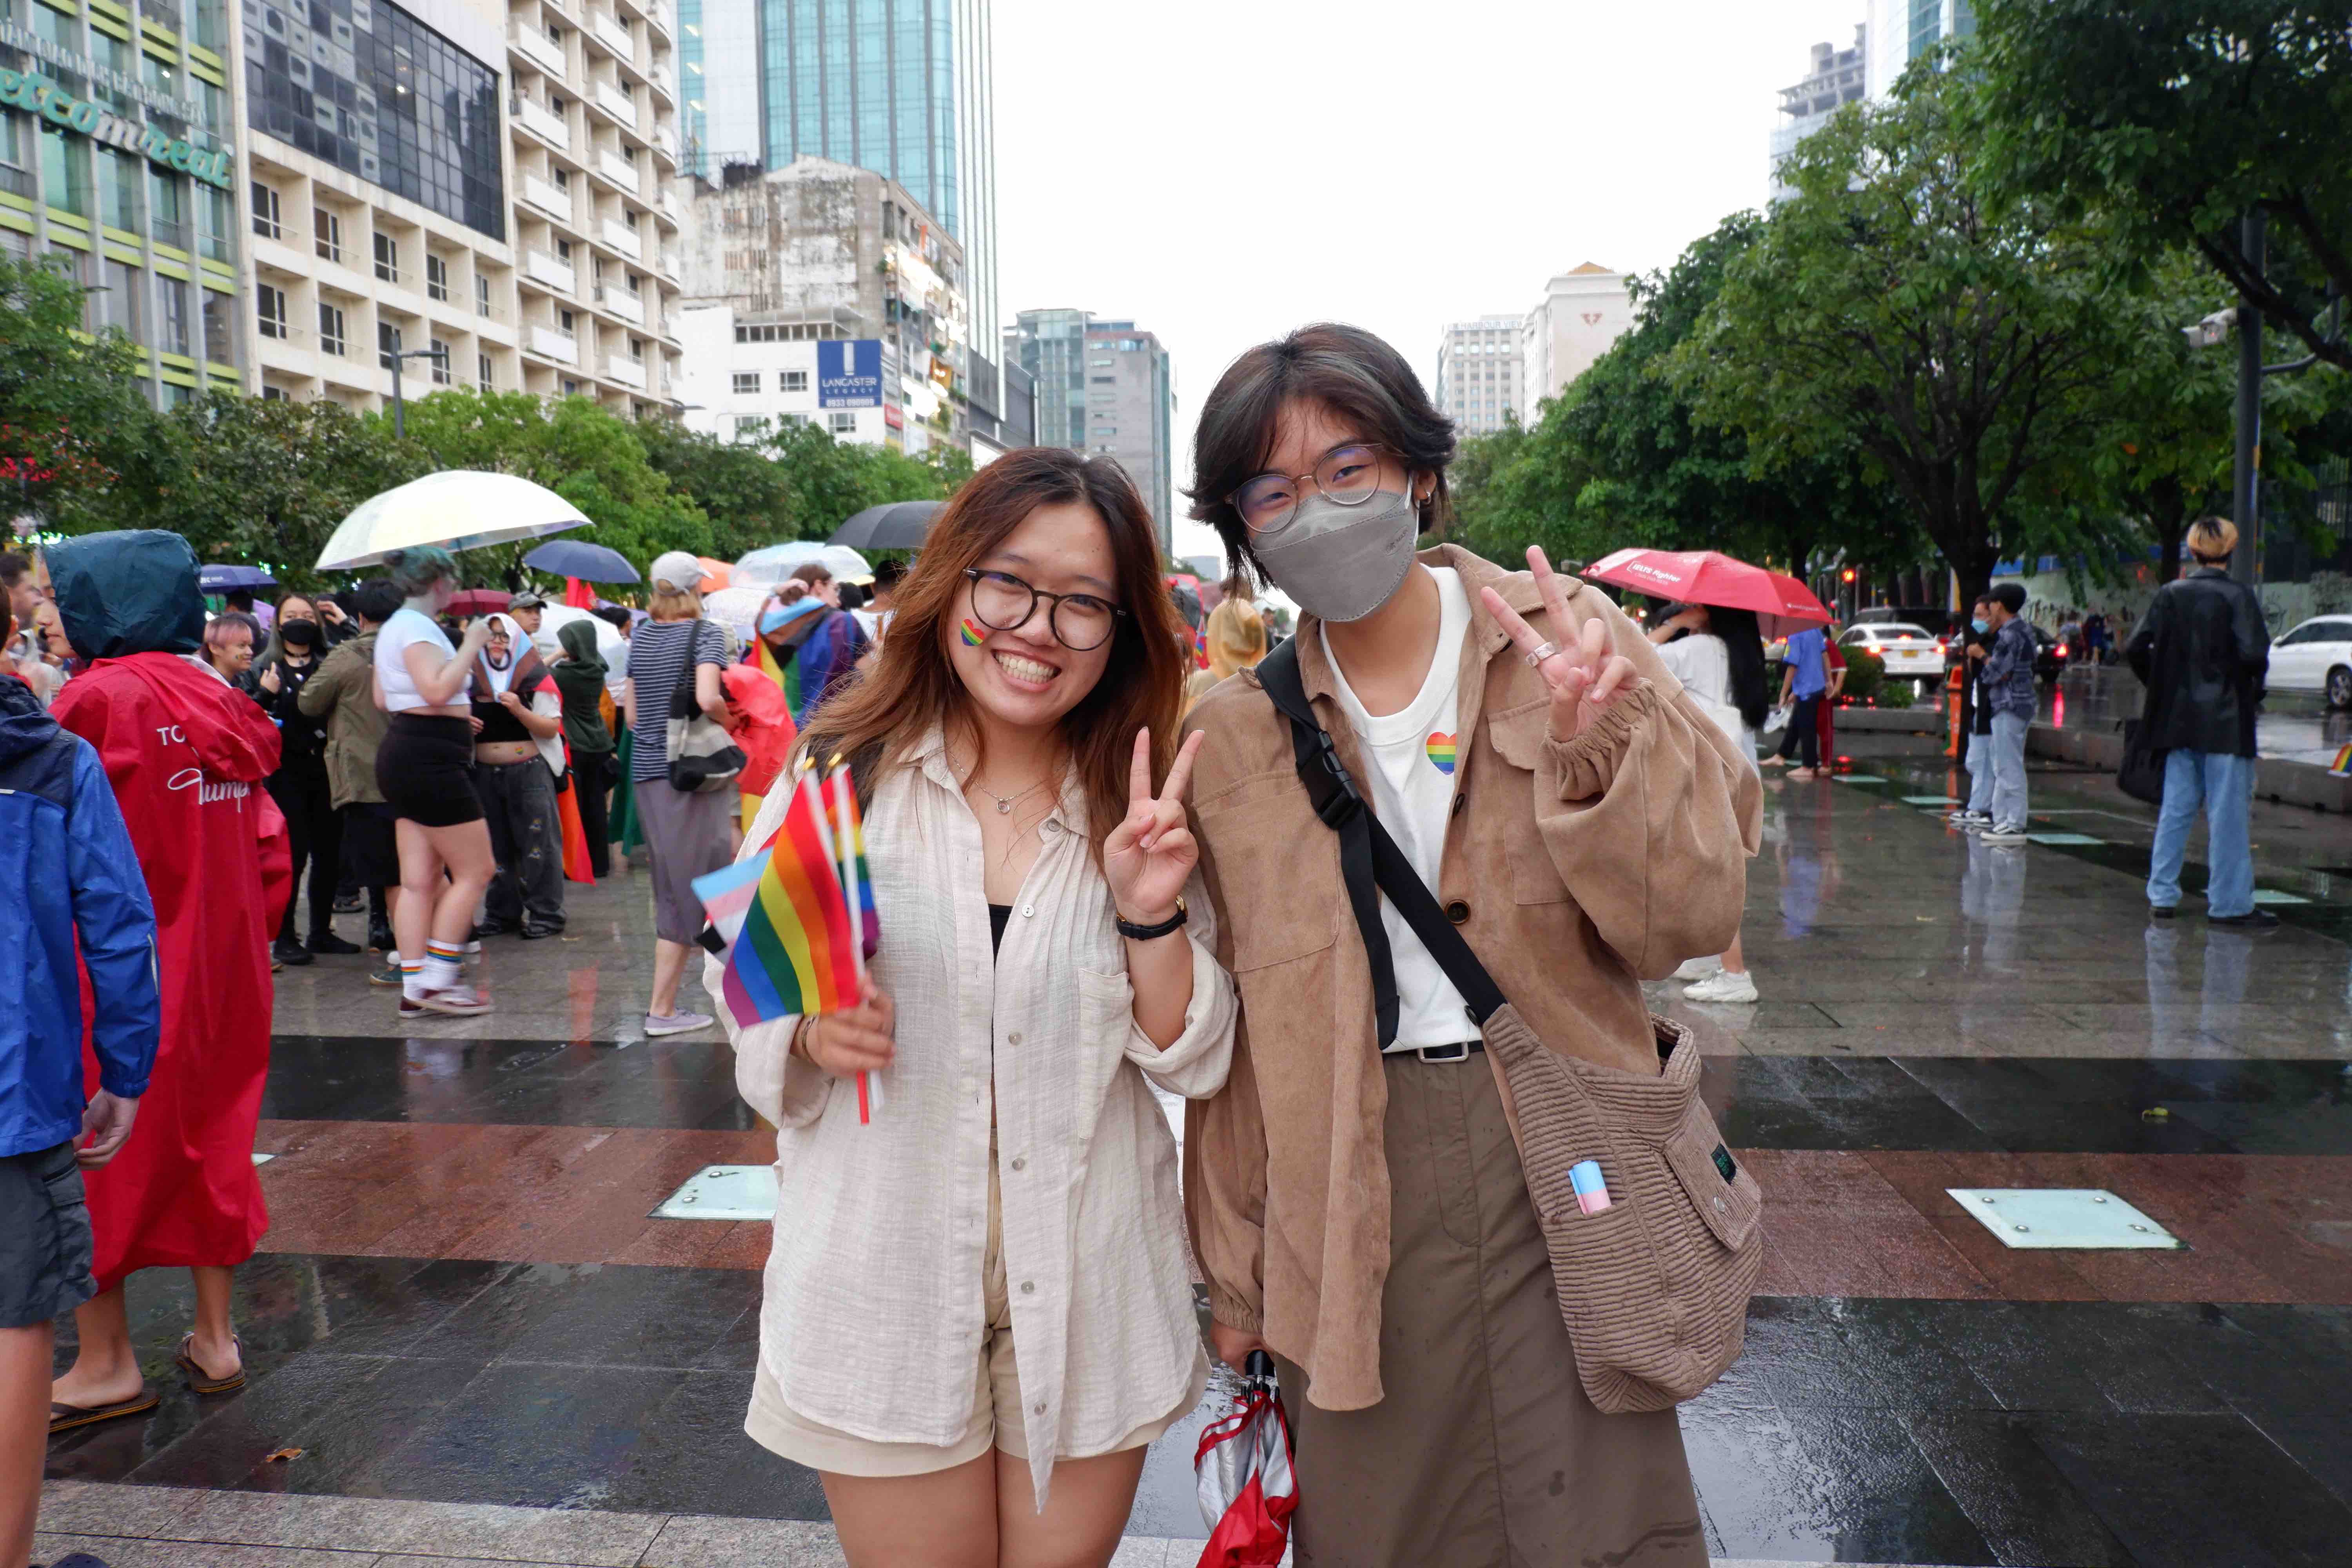 Young participants hold flags to show support for freedom and equality LGBT community during the VietPride parade in Ho Chi Minh City on October 1, 2022. Photo: Linh To / Tuoi Tre News